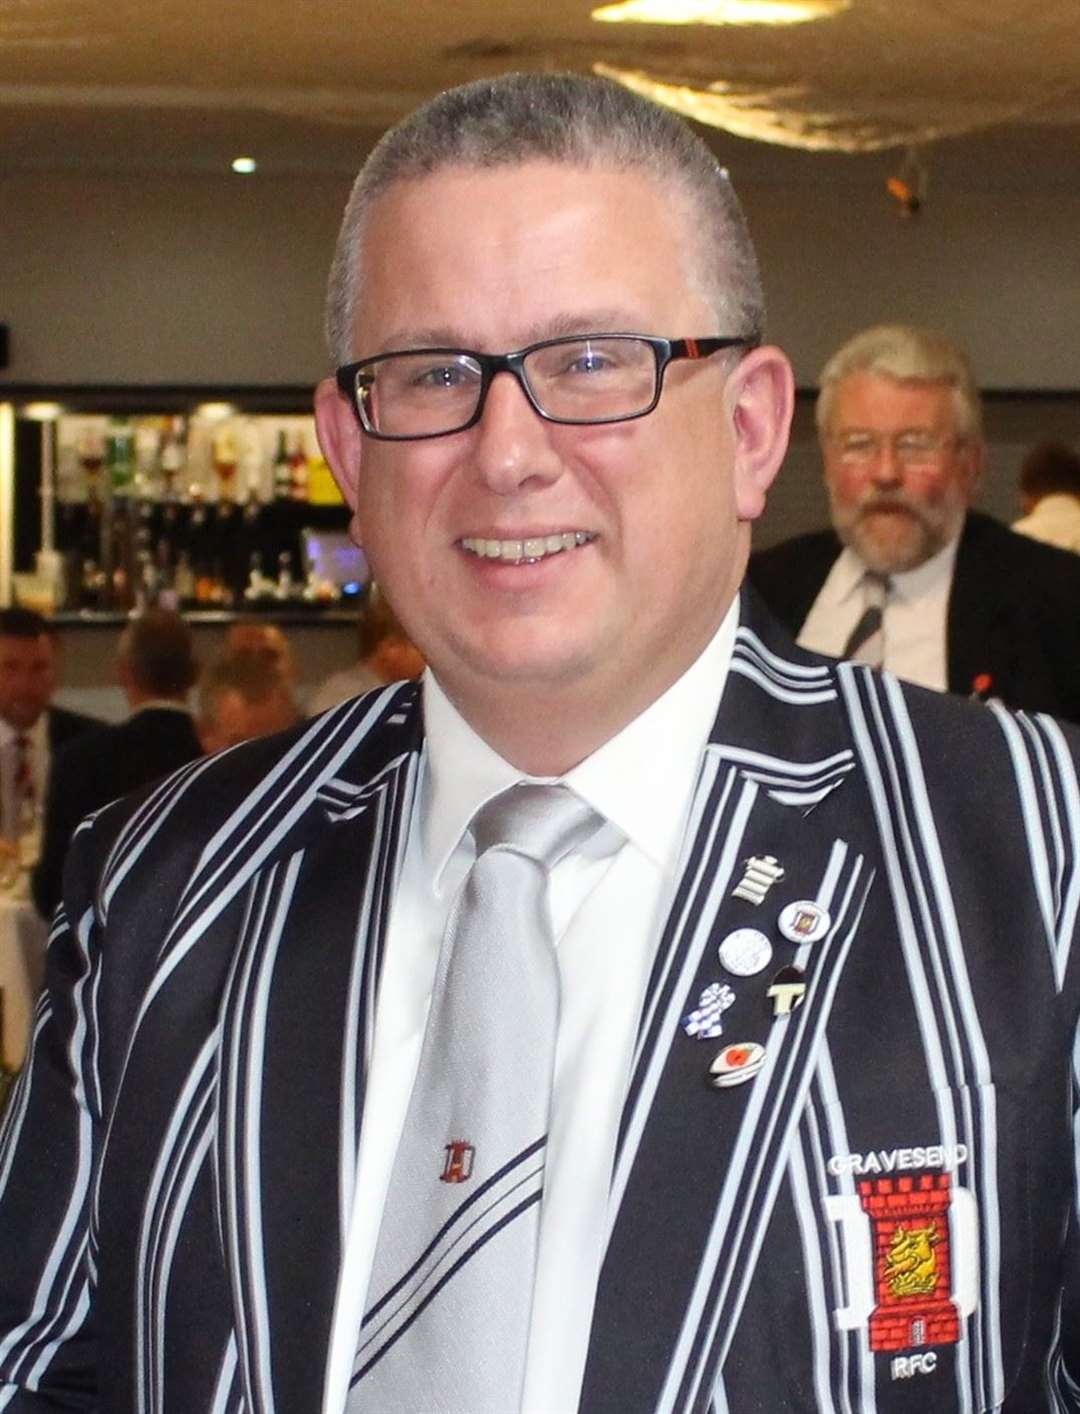 Mark Bruce is chairman of Gravesend Rugby Football Club